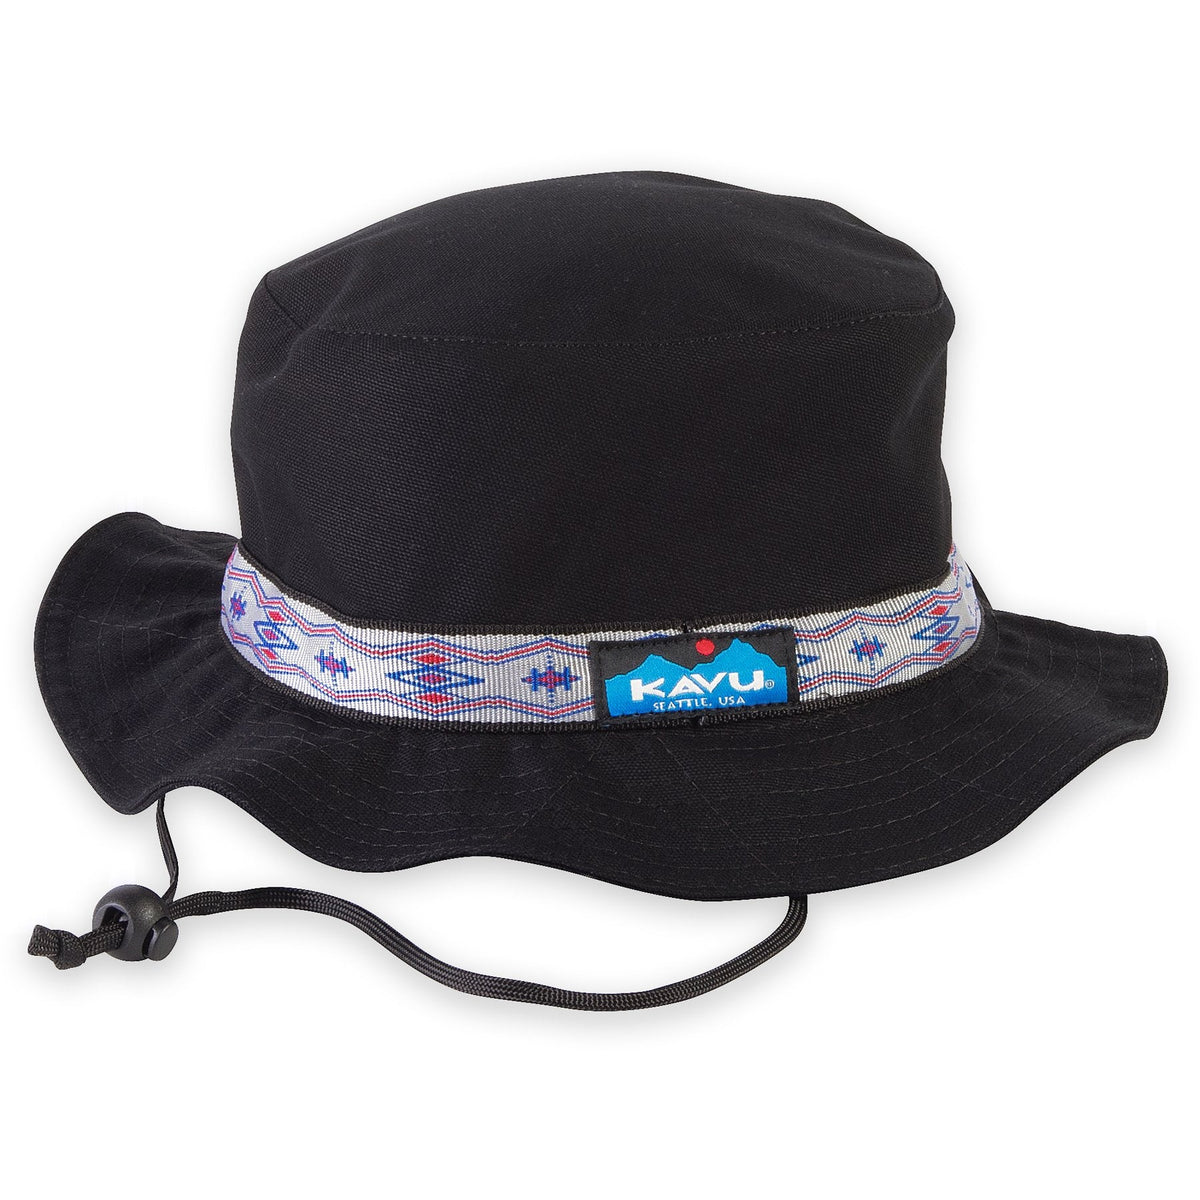 Organic Strap Bucket Hat – The Outfitters Adventure Gear and Apparel